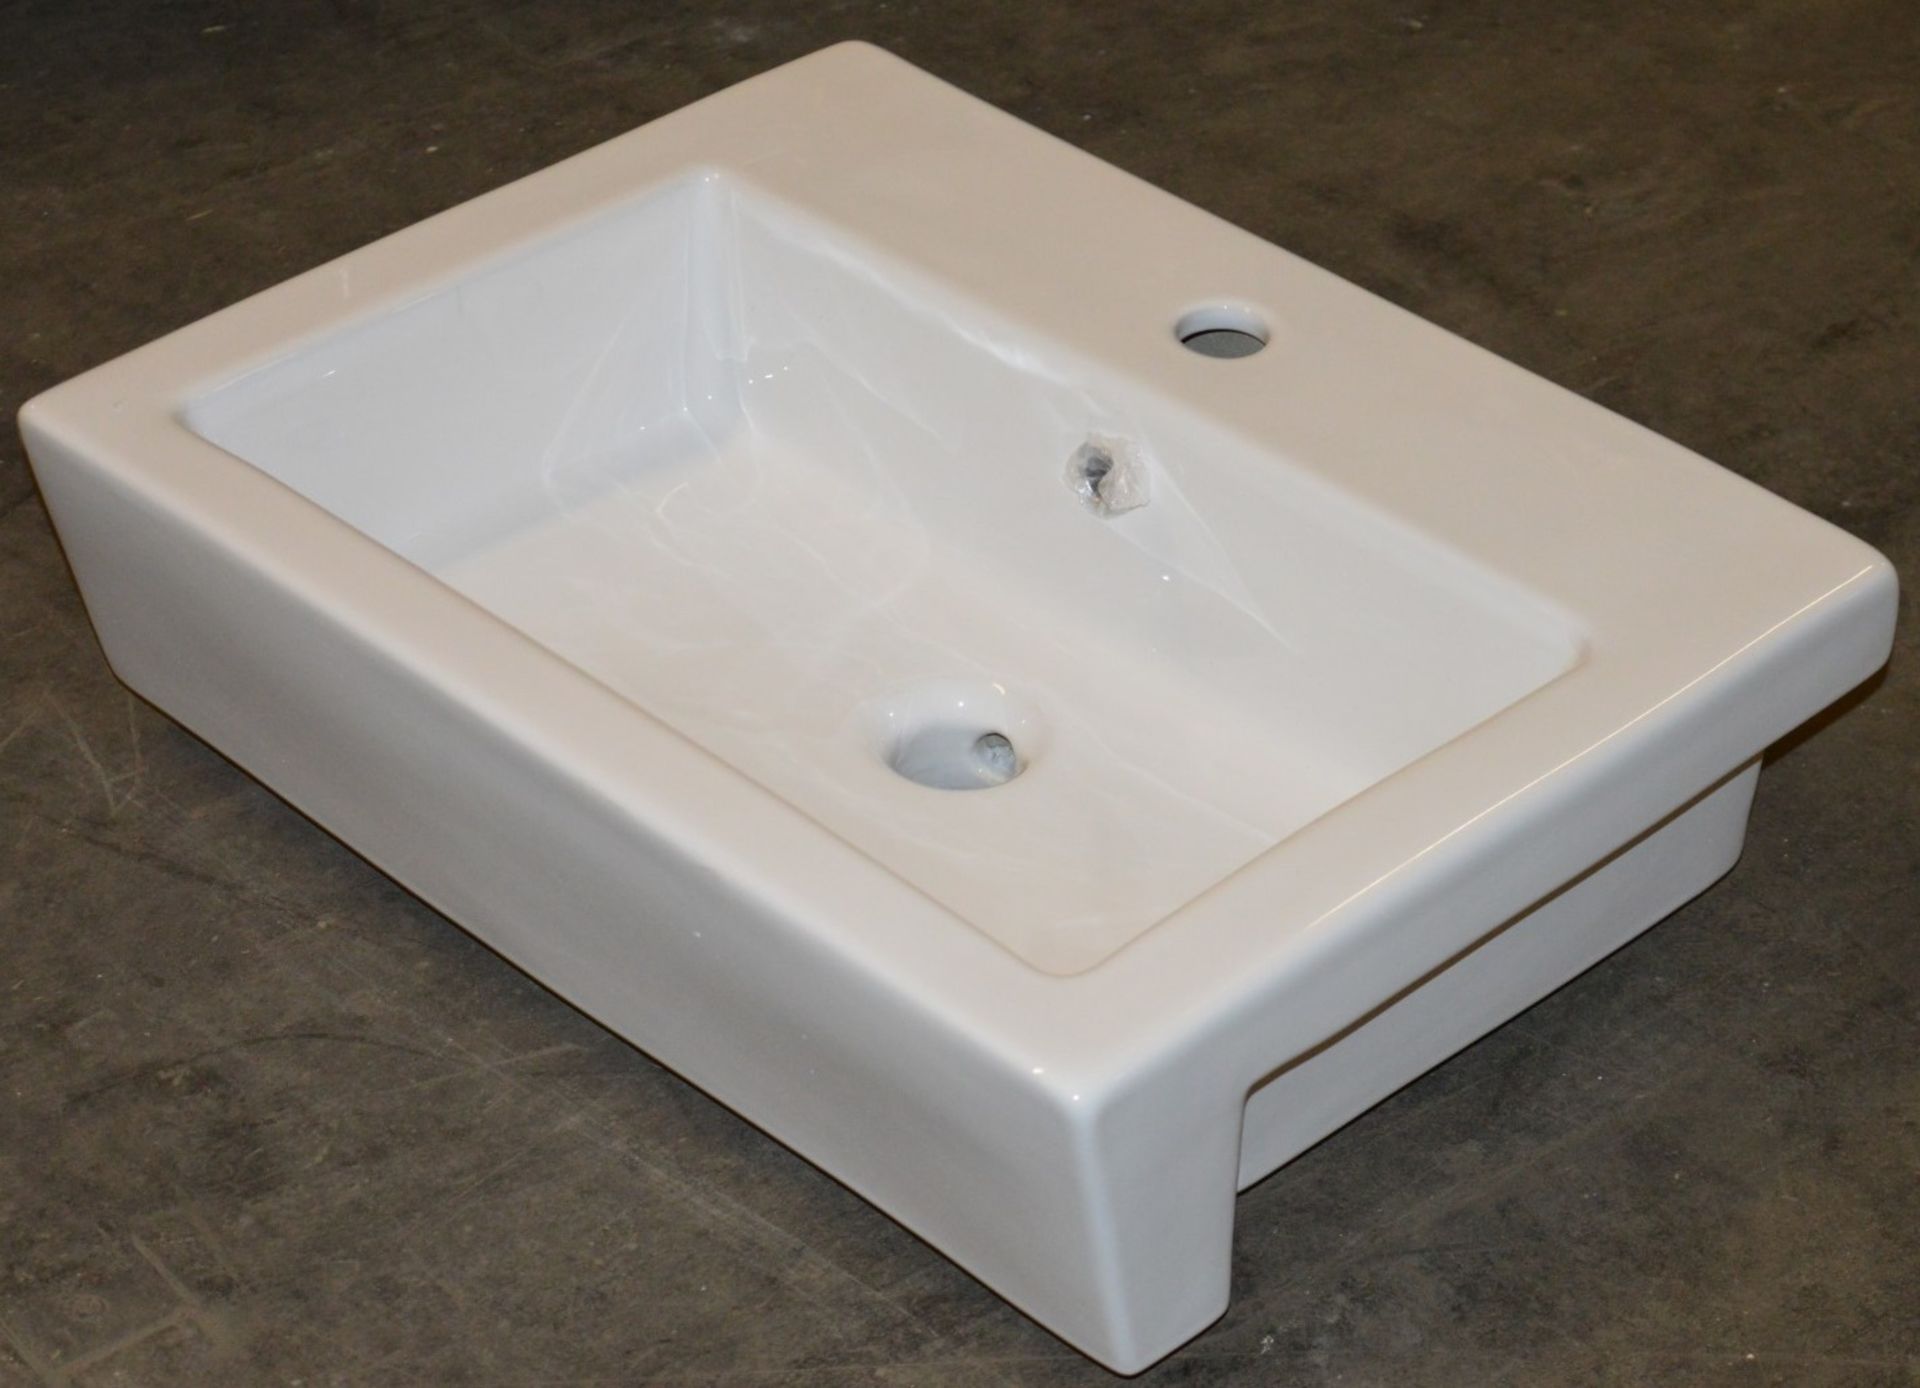 1 x Vogue Bathrooms ZEN Single Tap Hole SEMI RECESSED SINK BASIN - 550mm Width - Brand New Boxed - Image 4 of 5